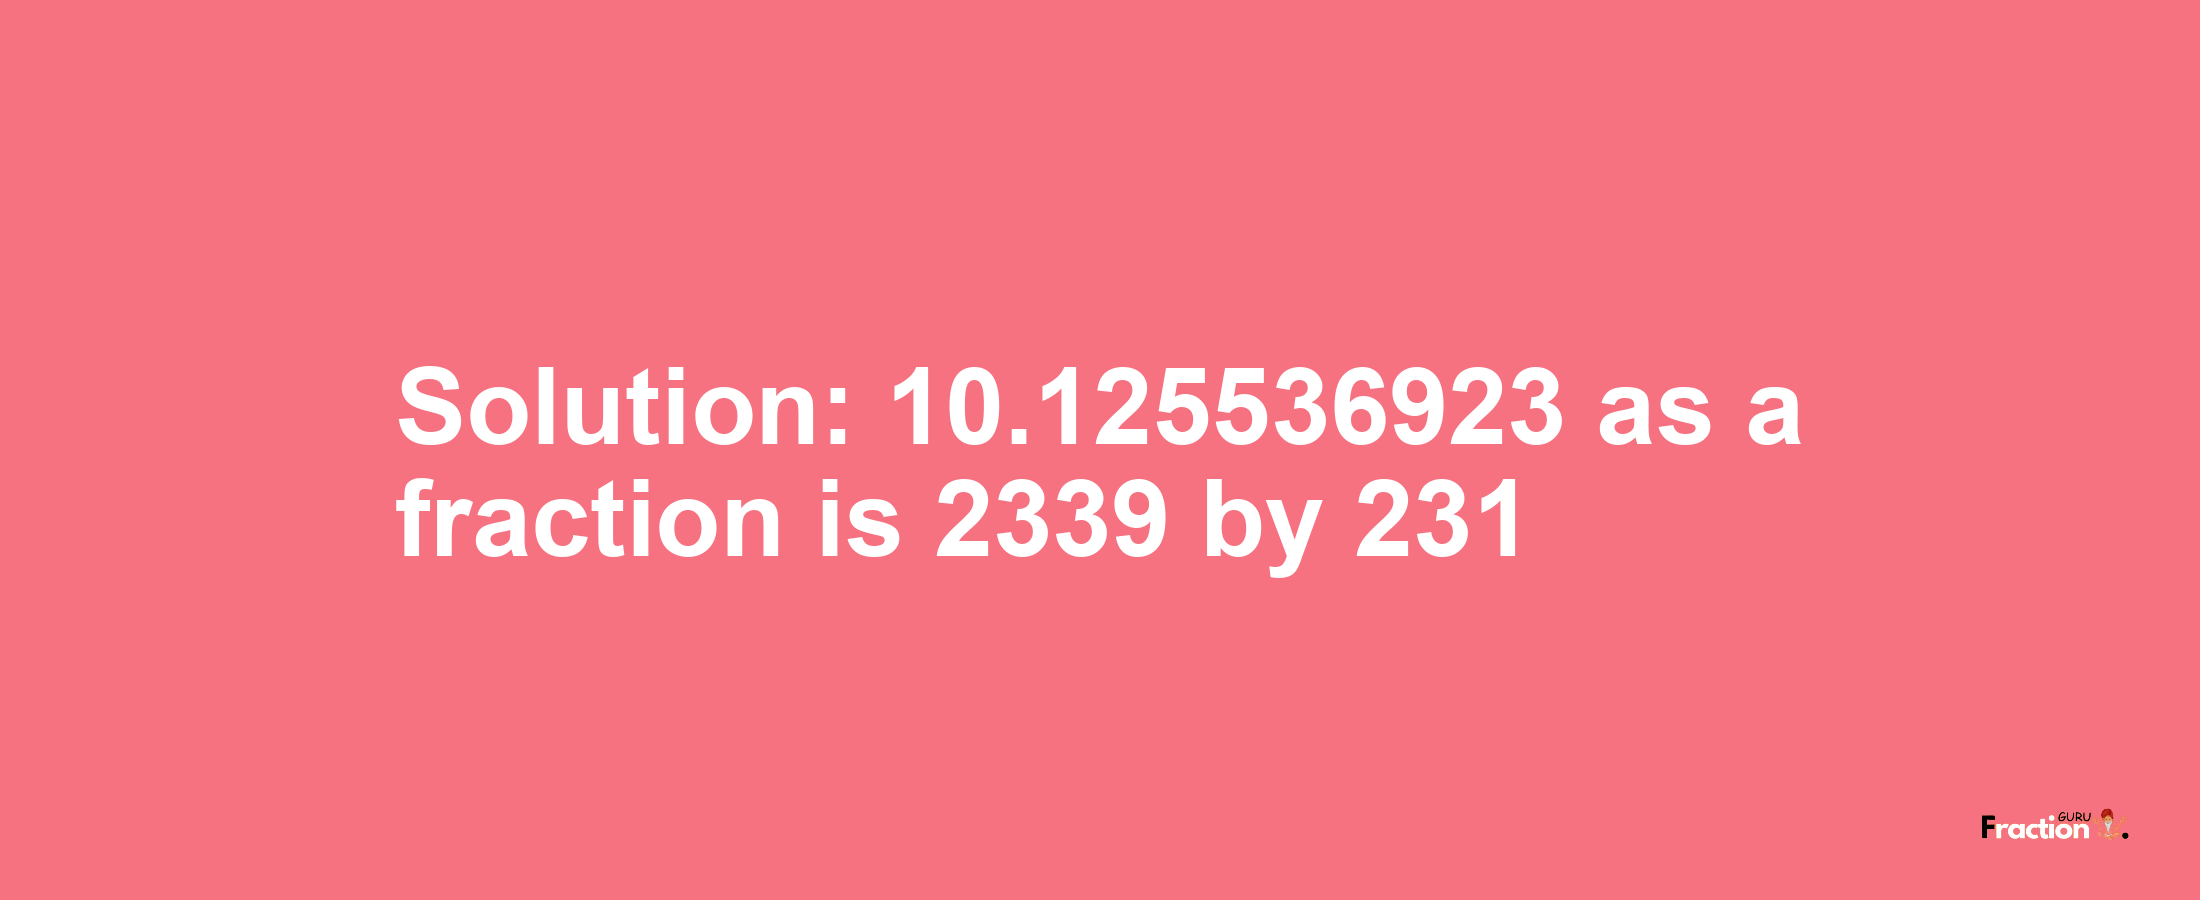 Solution:10.125536923 as a fraction is 2339/231